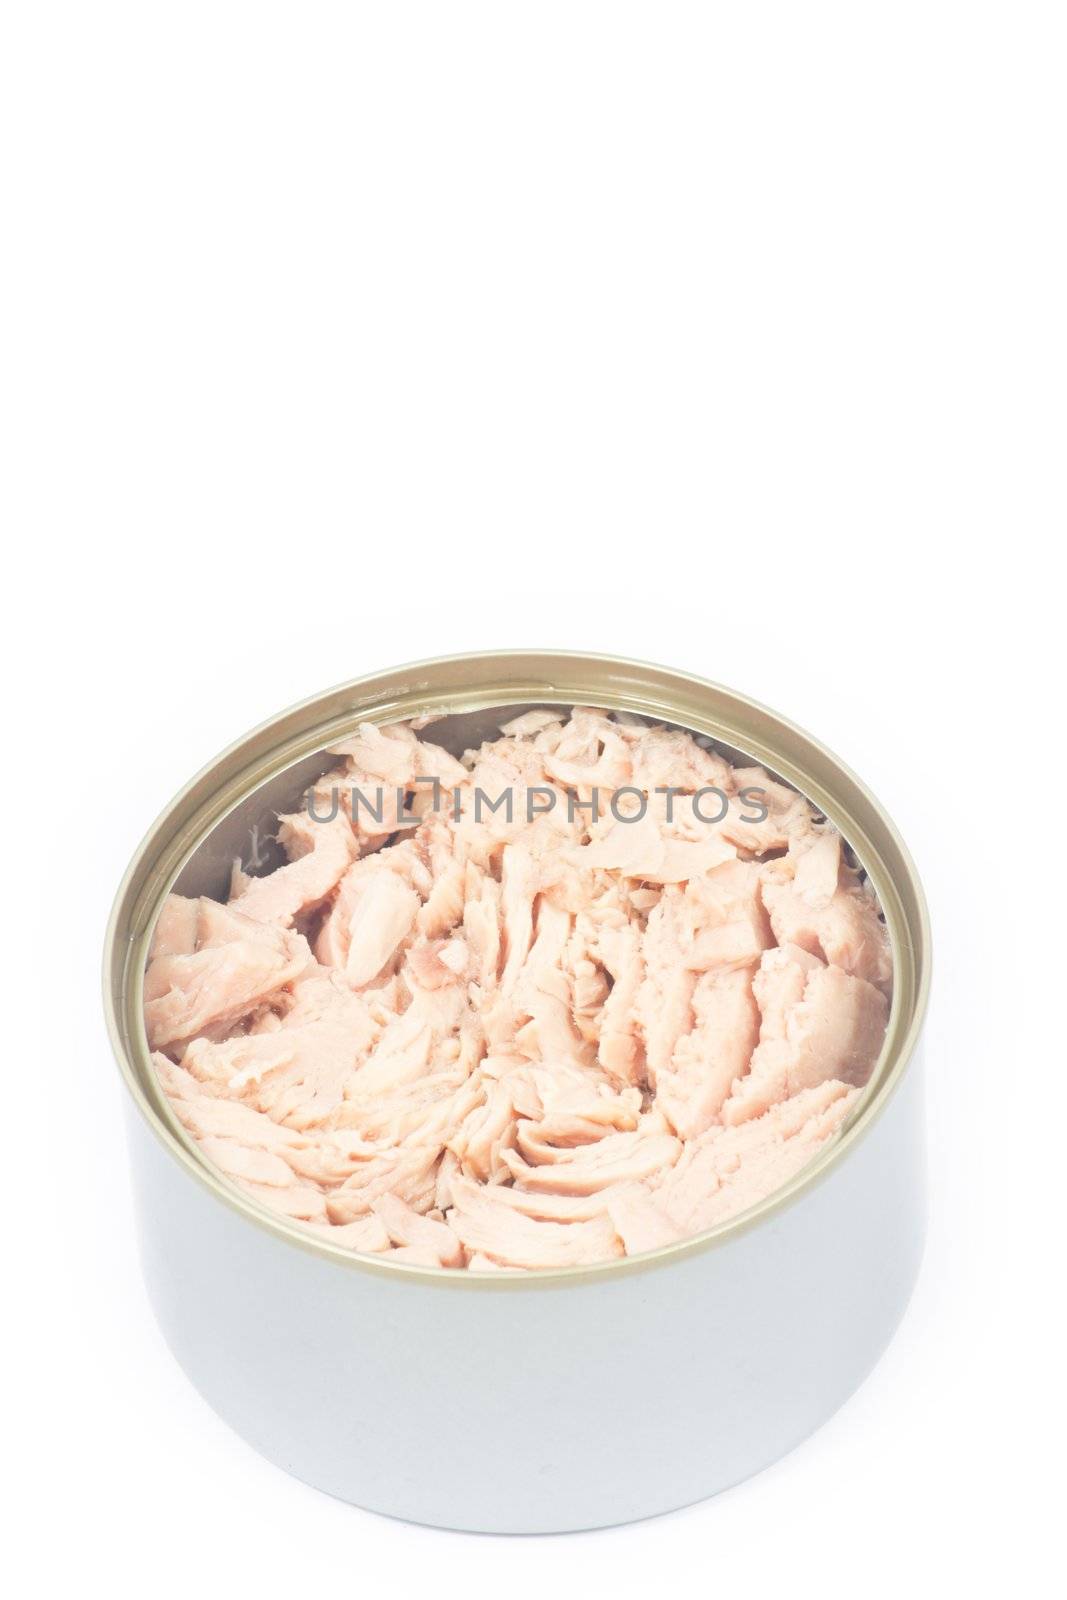 Tuna in vegetable oil in opened can on white isolated